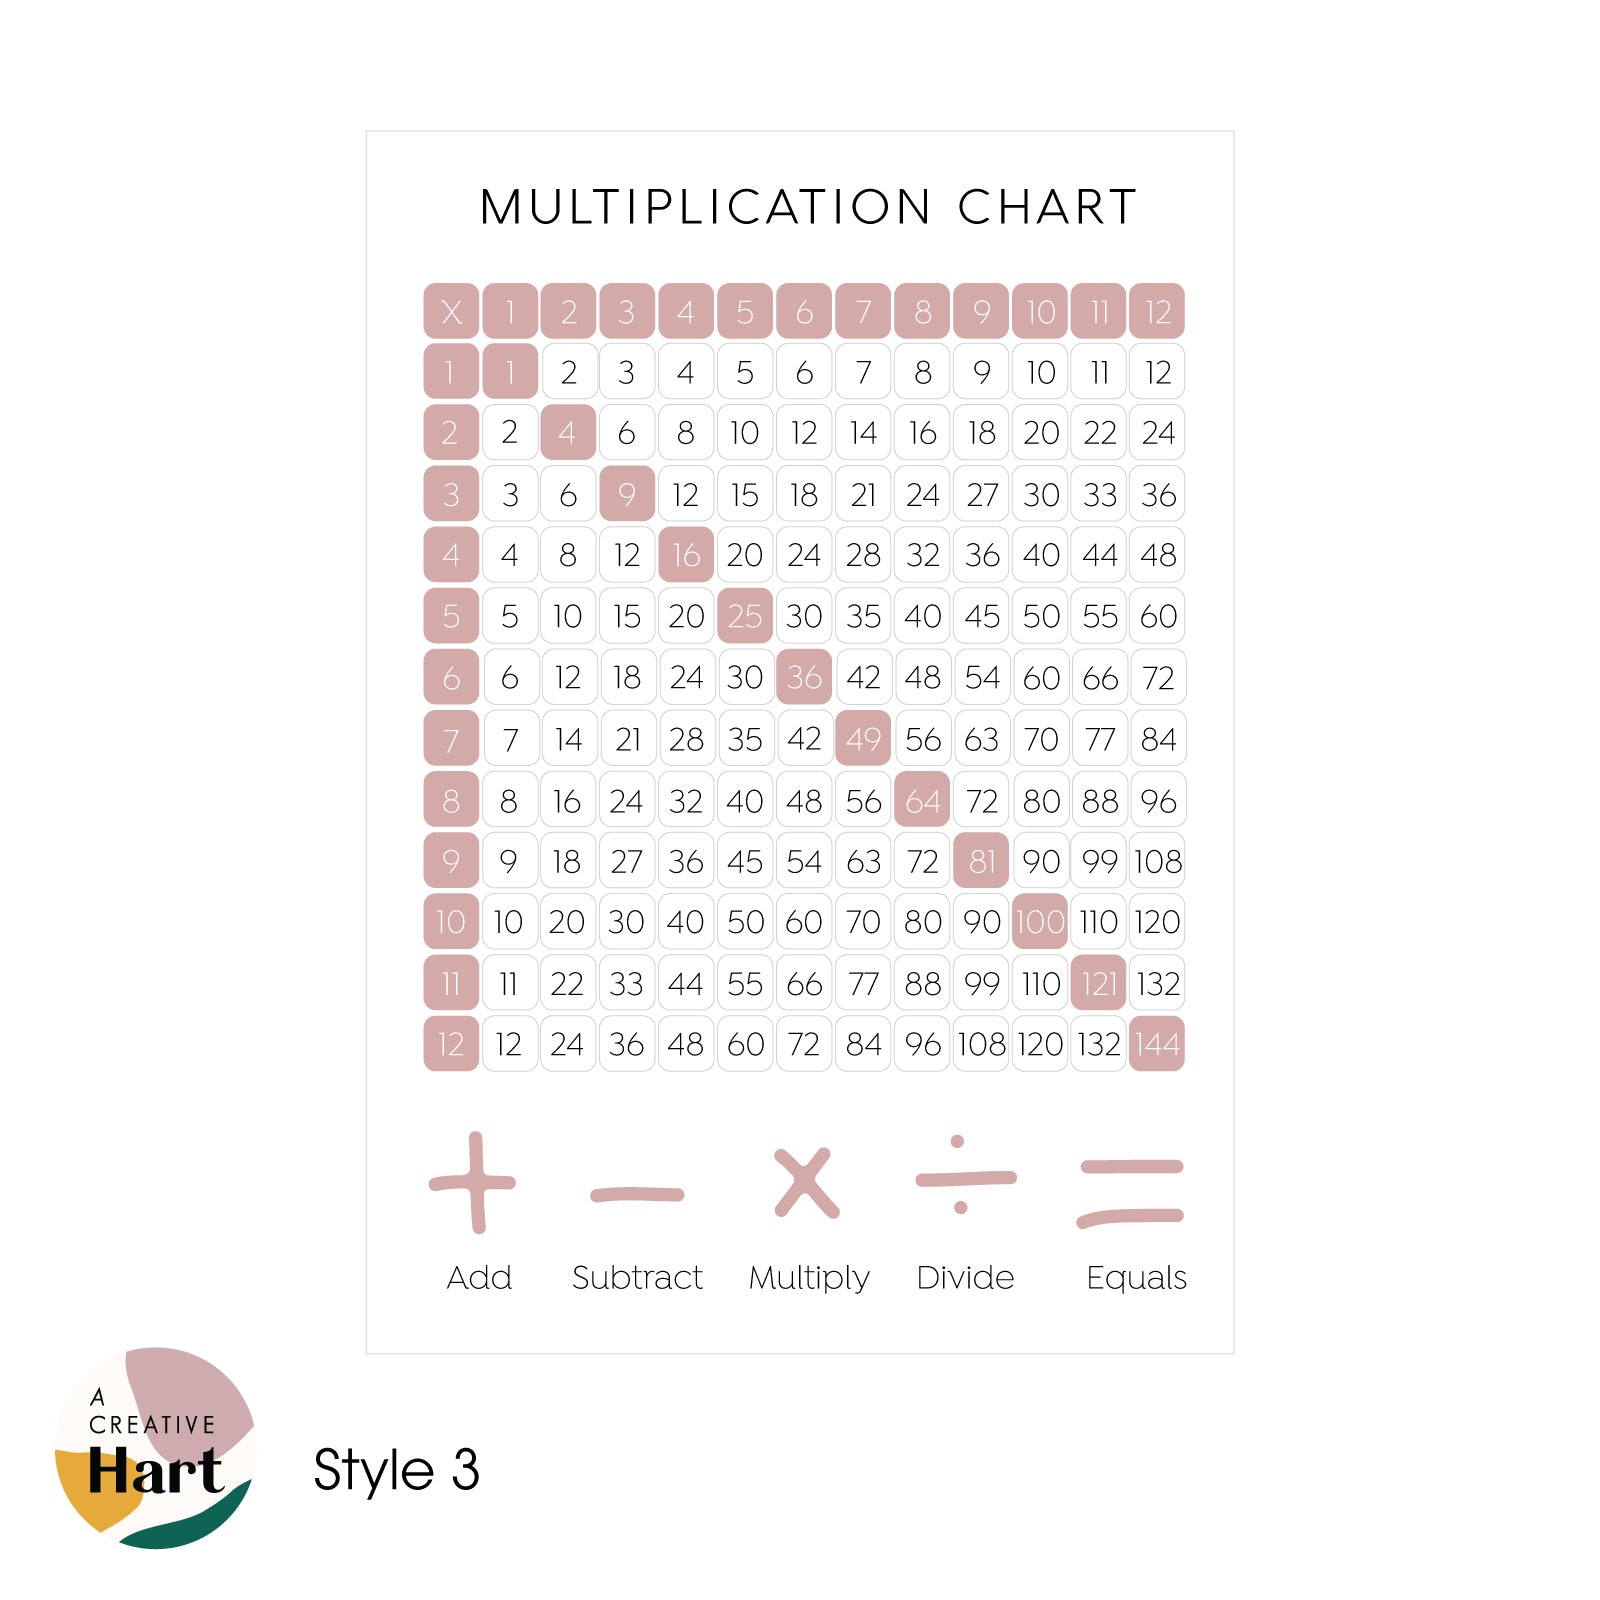 Multiplication Chart - Times Tables Fabric Wall Decal - A Creative Hart